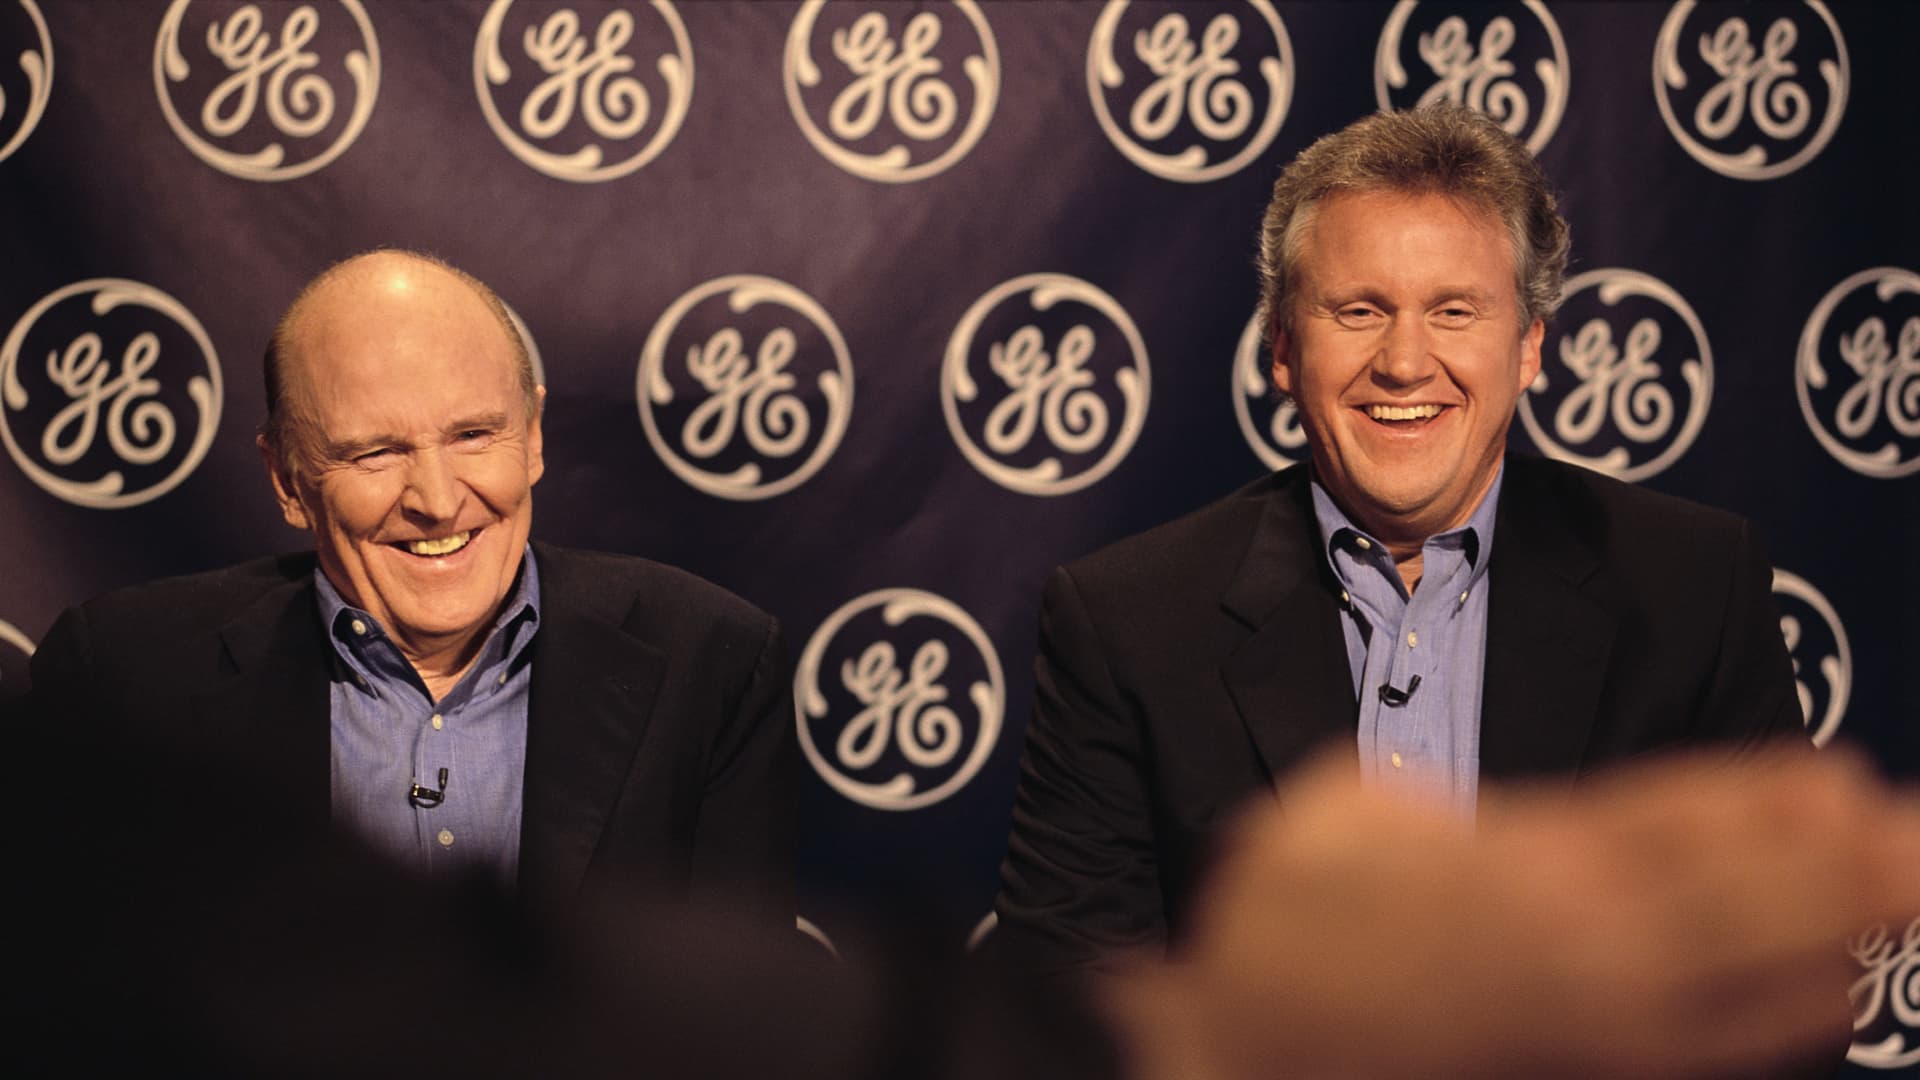 General Electric executives Jack Welch and Jeffrey Immelt attend a press conference in New York City. The conference is to announce that Immelt has been named President and Chairman elect of GE, succeeding Welch.